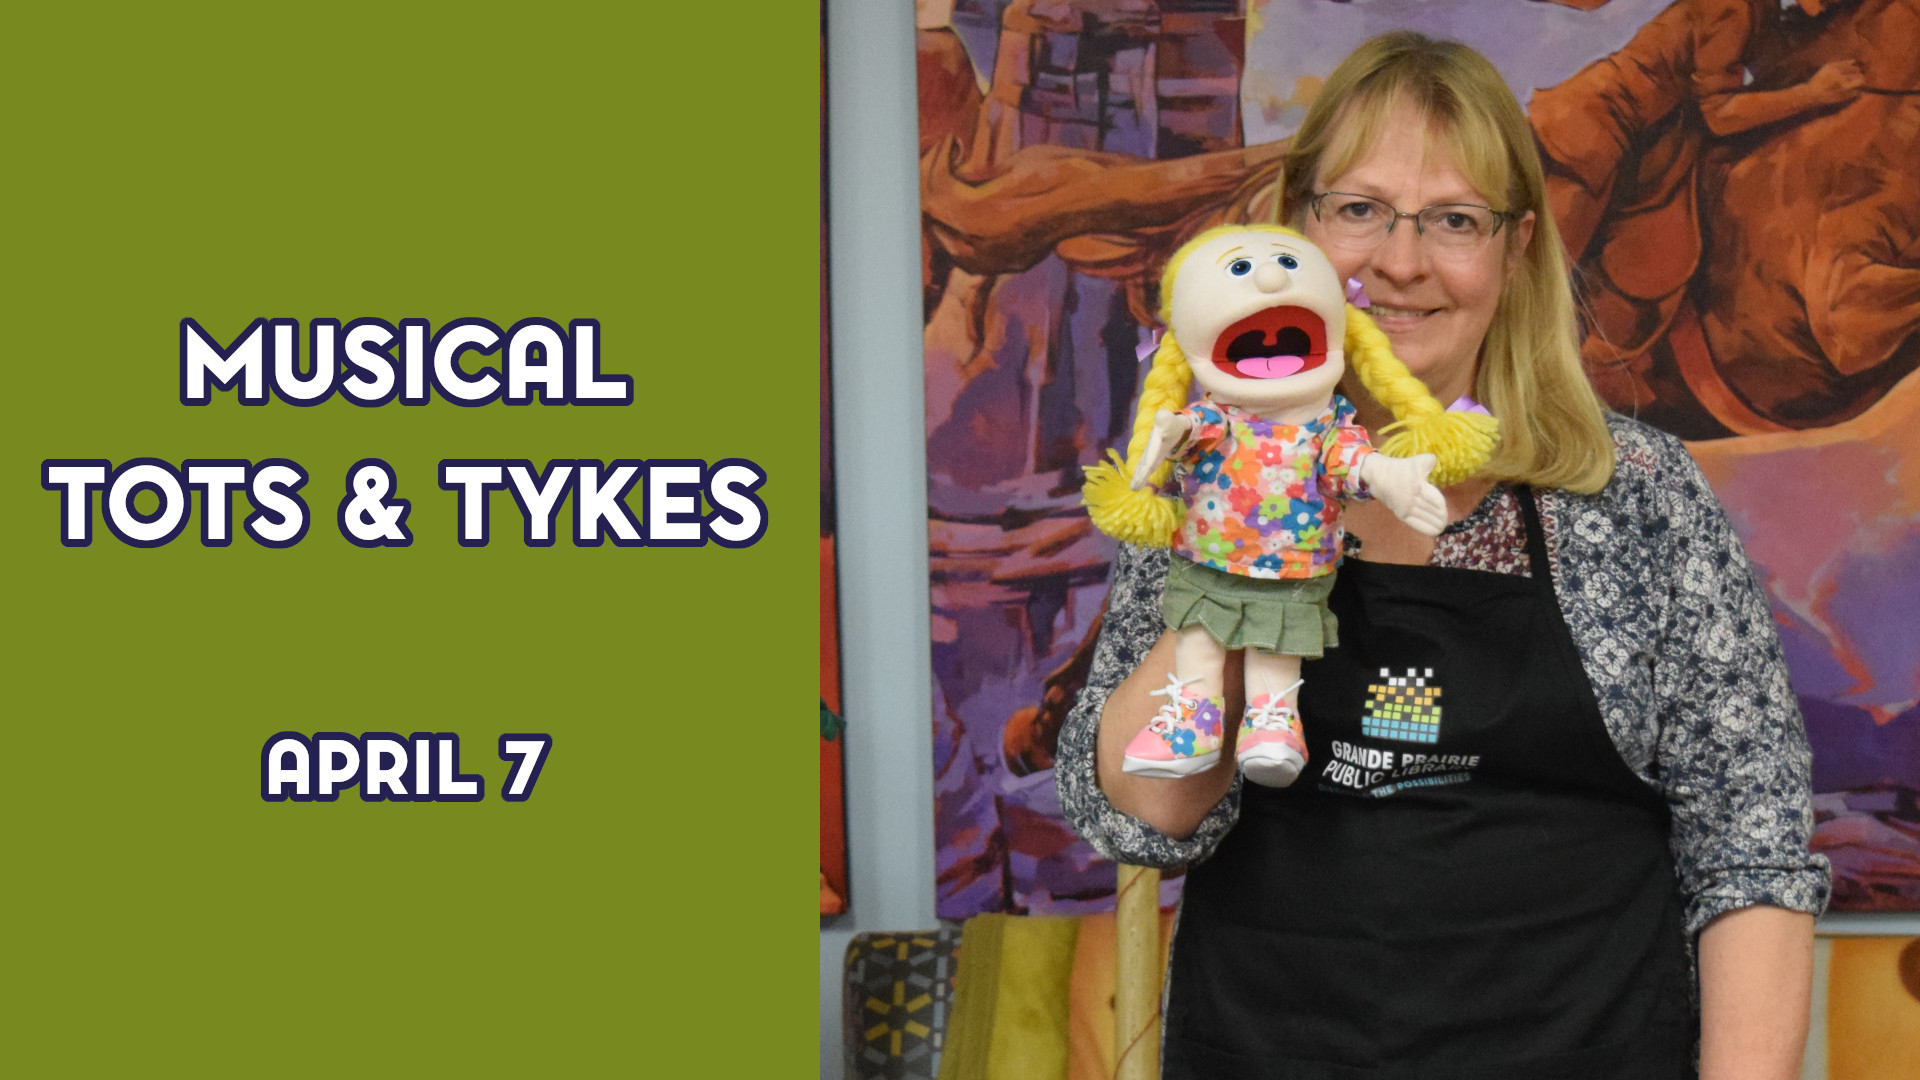 A woman holds a puppet next to the text "Musical Tots & Tykes April 7"